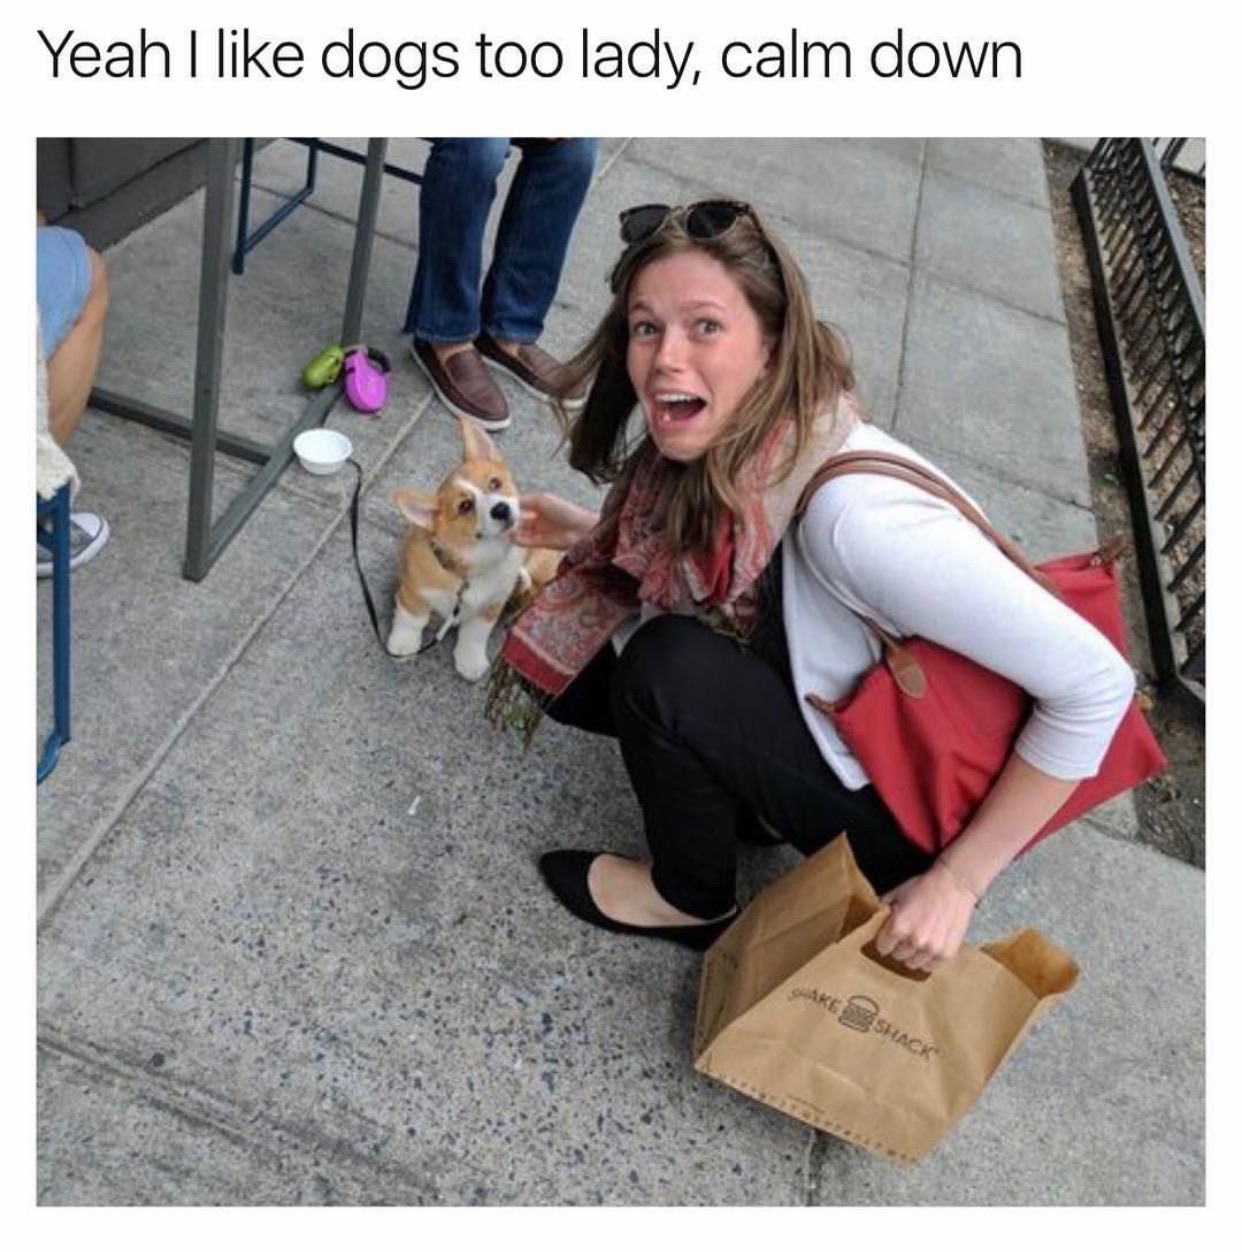 memes - infp mbti memes - Yeah I dogs too lady, calm down